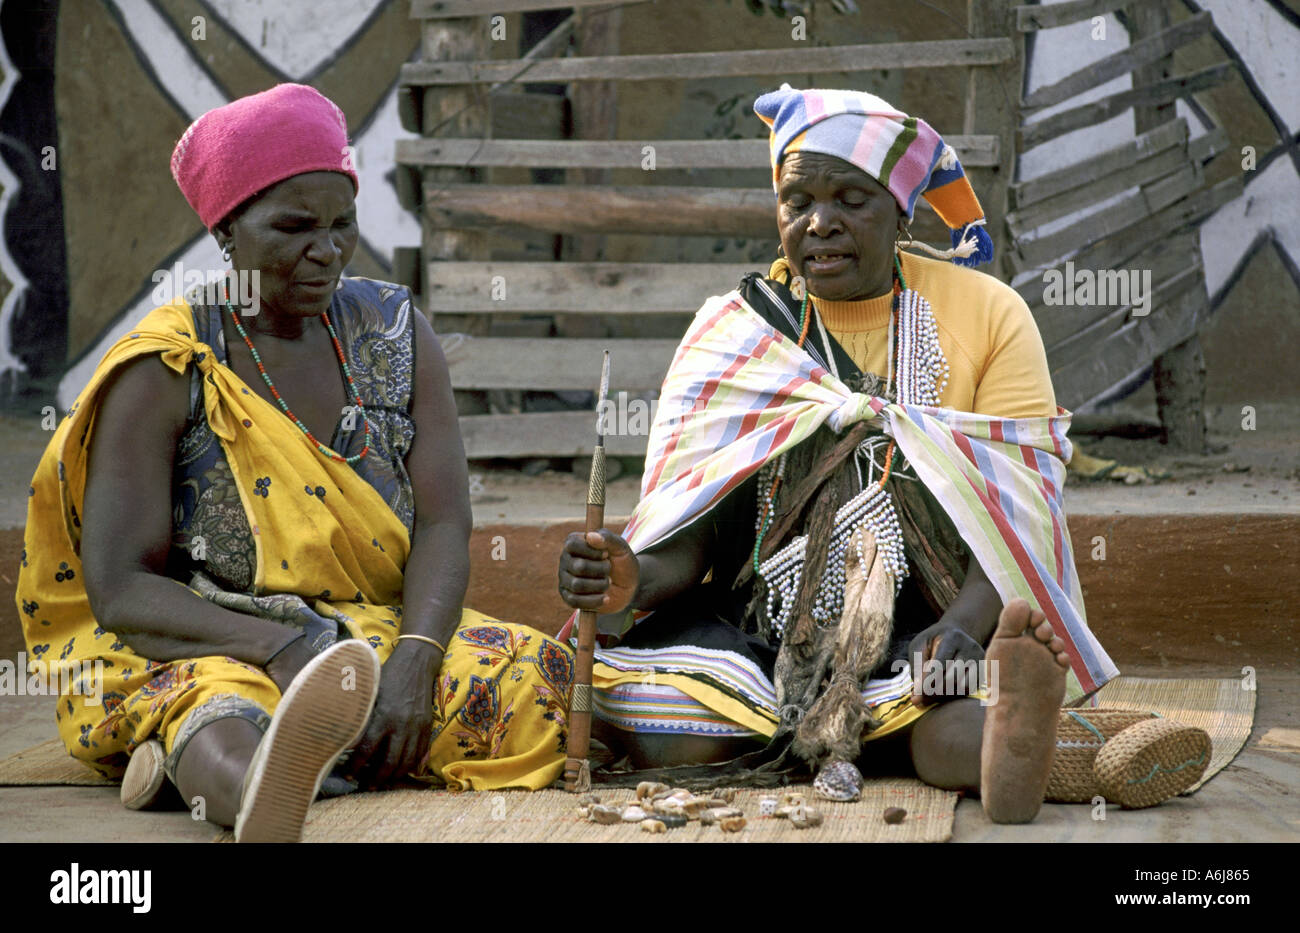 A sangoma (traditional healer / witchdoctor) near Tzaneen in South Africa's Northern Province. Stock Photo